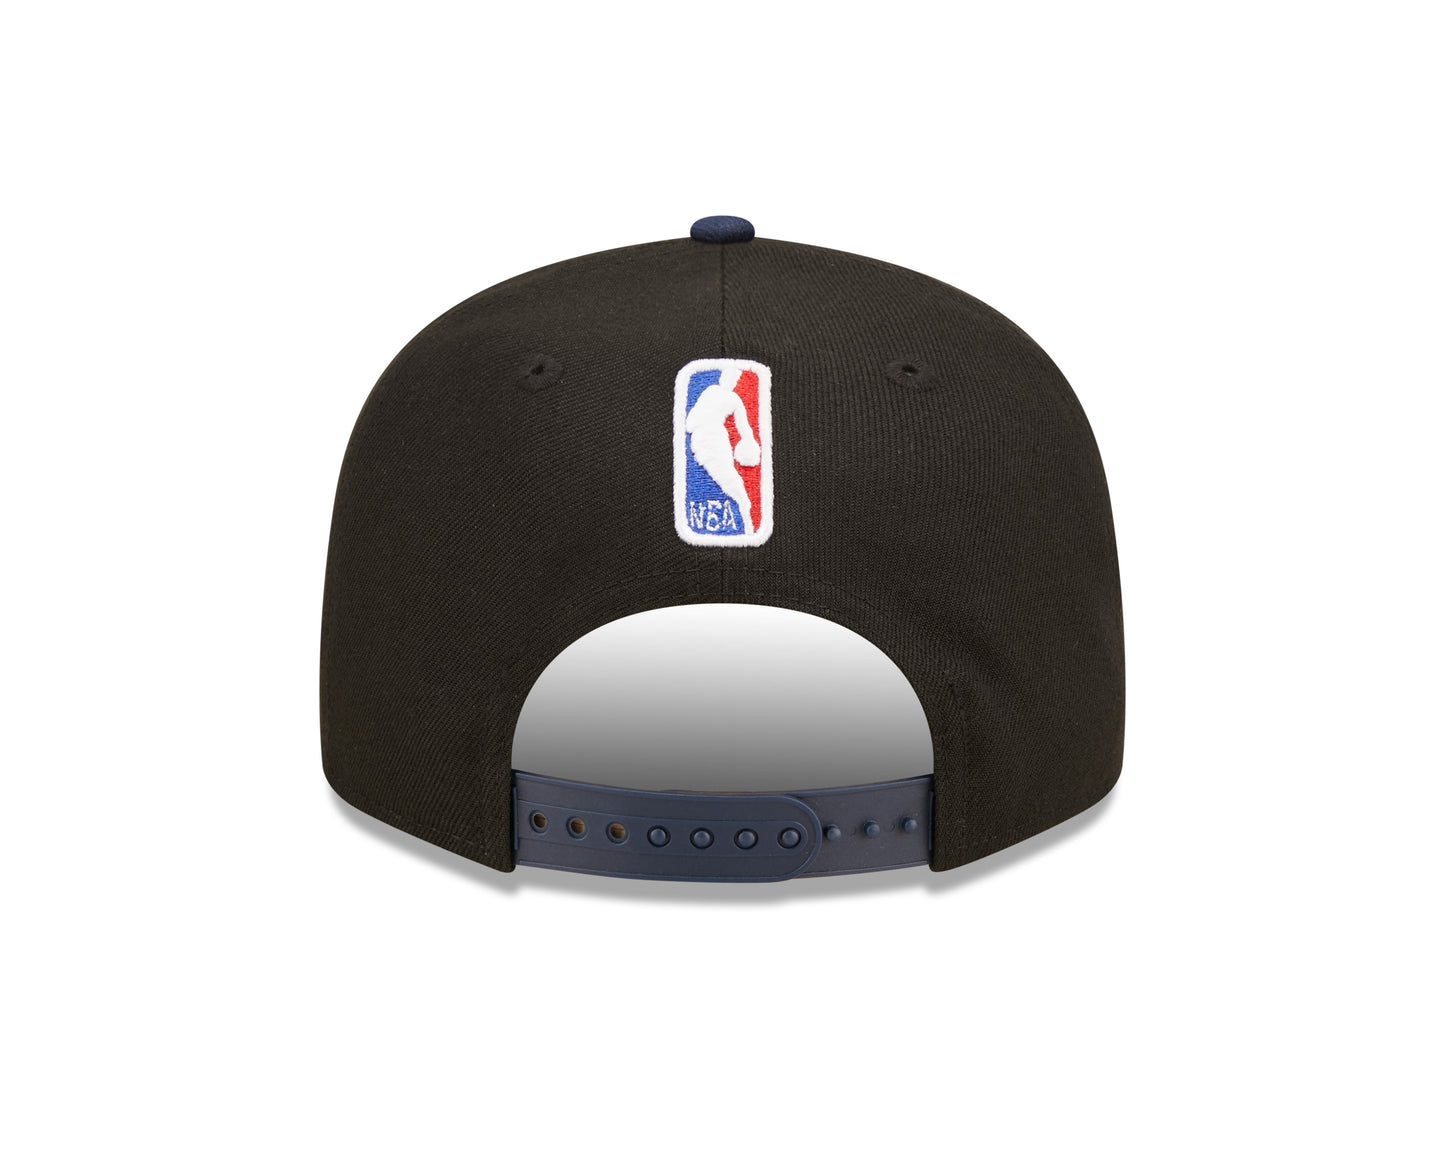 Indiana Pacers New Era Tip-Off 9FIFTY Snap Back Hat - Navy/Black